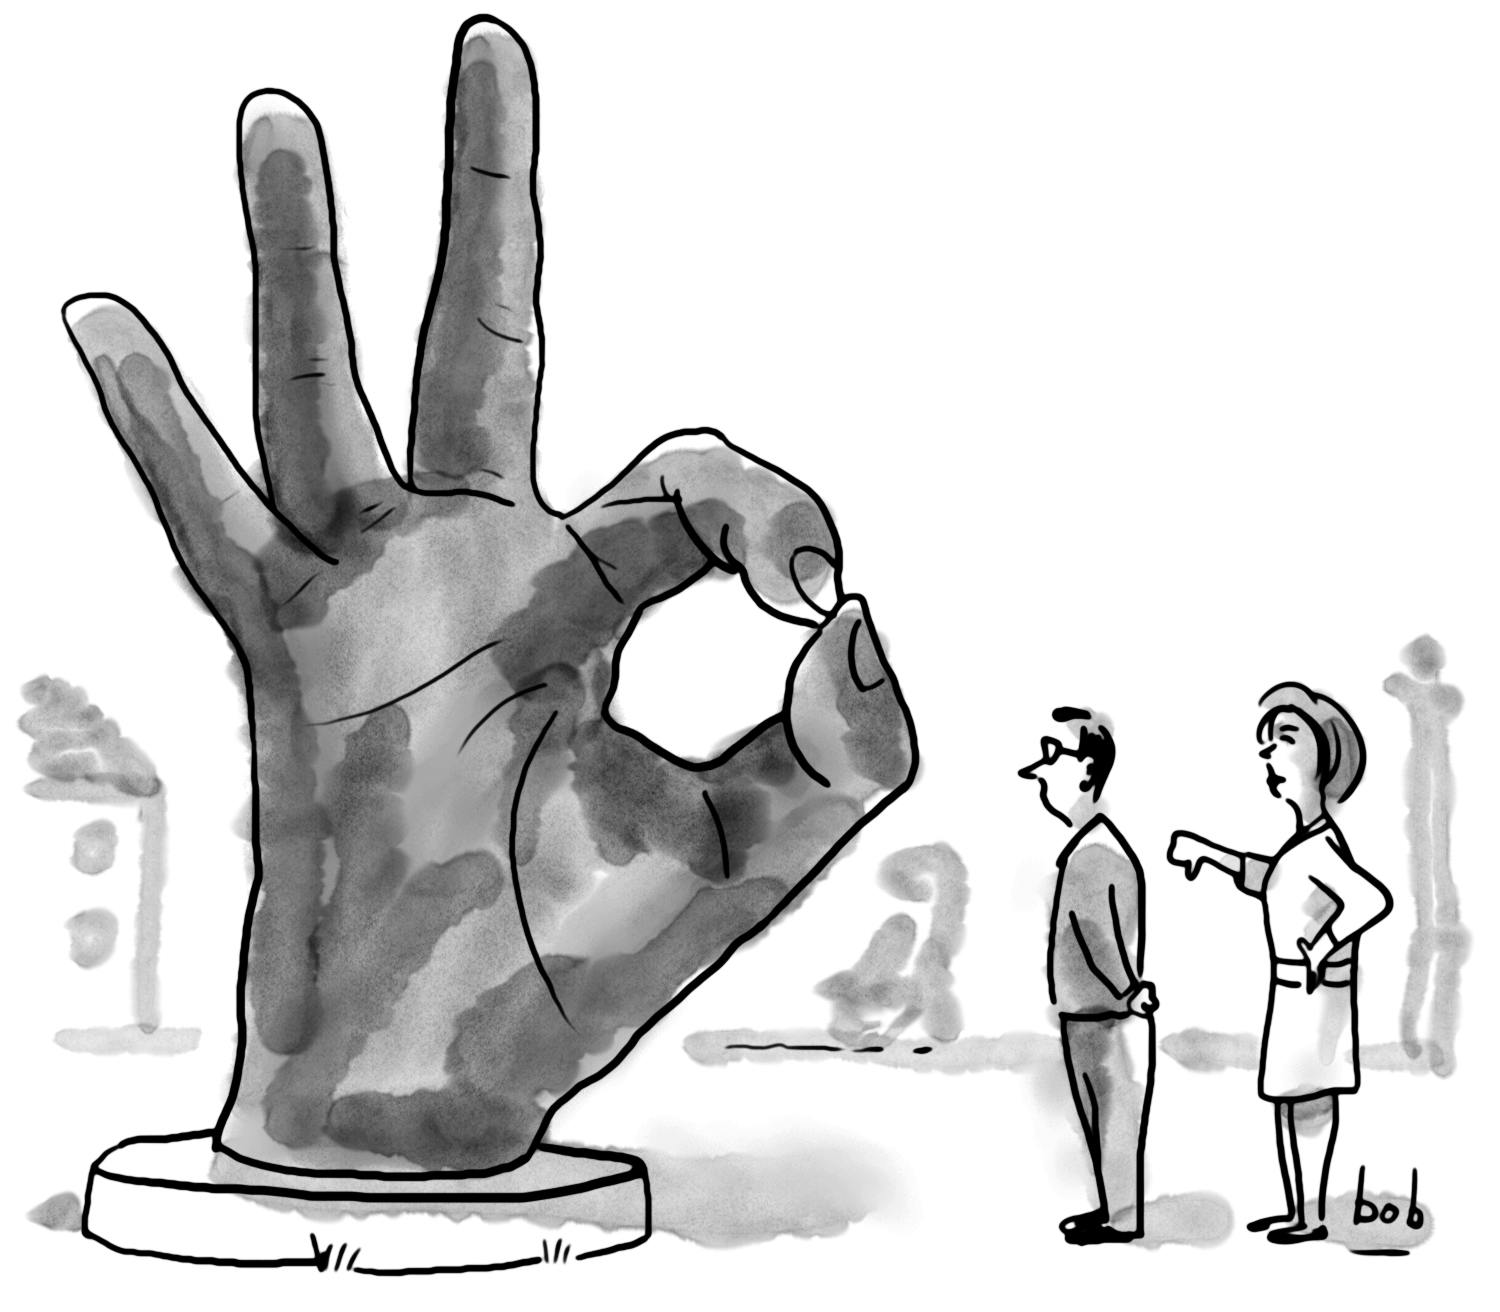 Cartoon: A man and woman stand in front of a large piece of outdoor artwork, a sculpture of a hand making an 'OK' symbol. The woman is giving the artwork a thumbs-down.